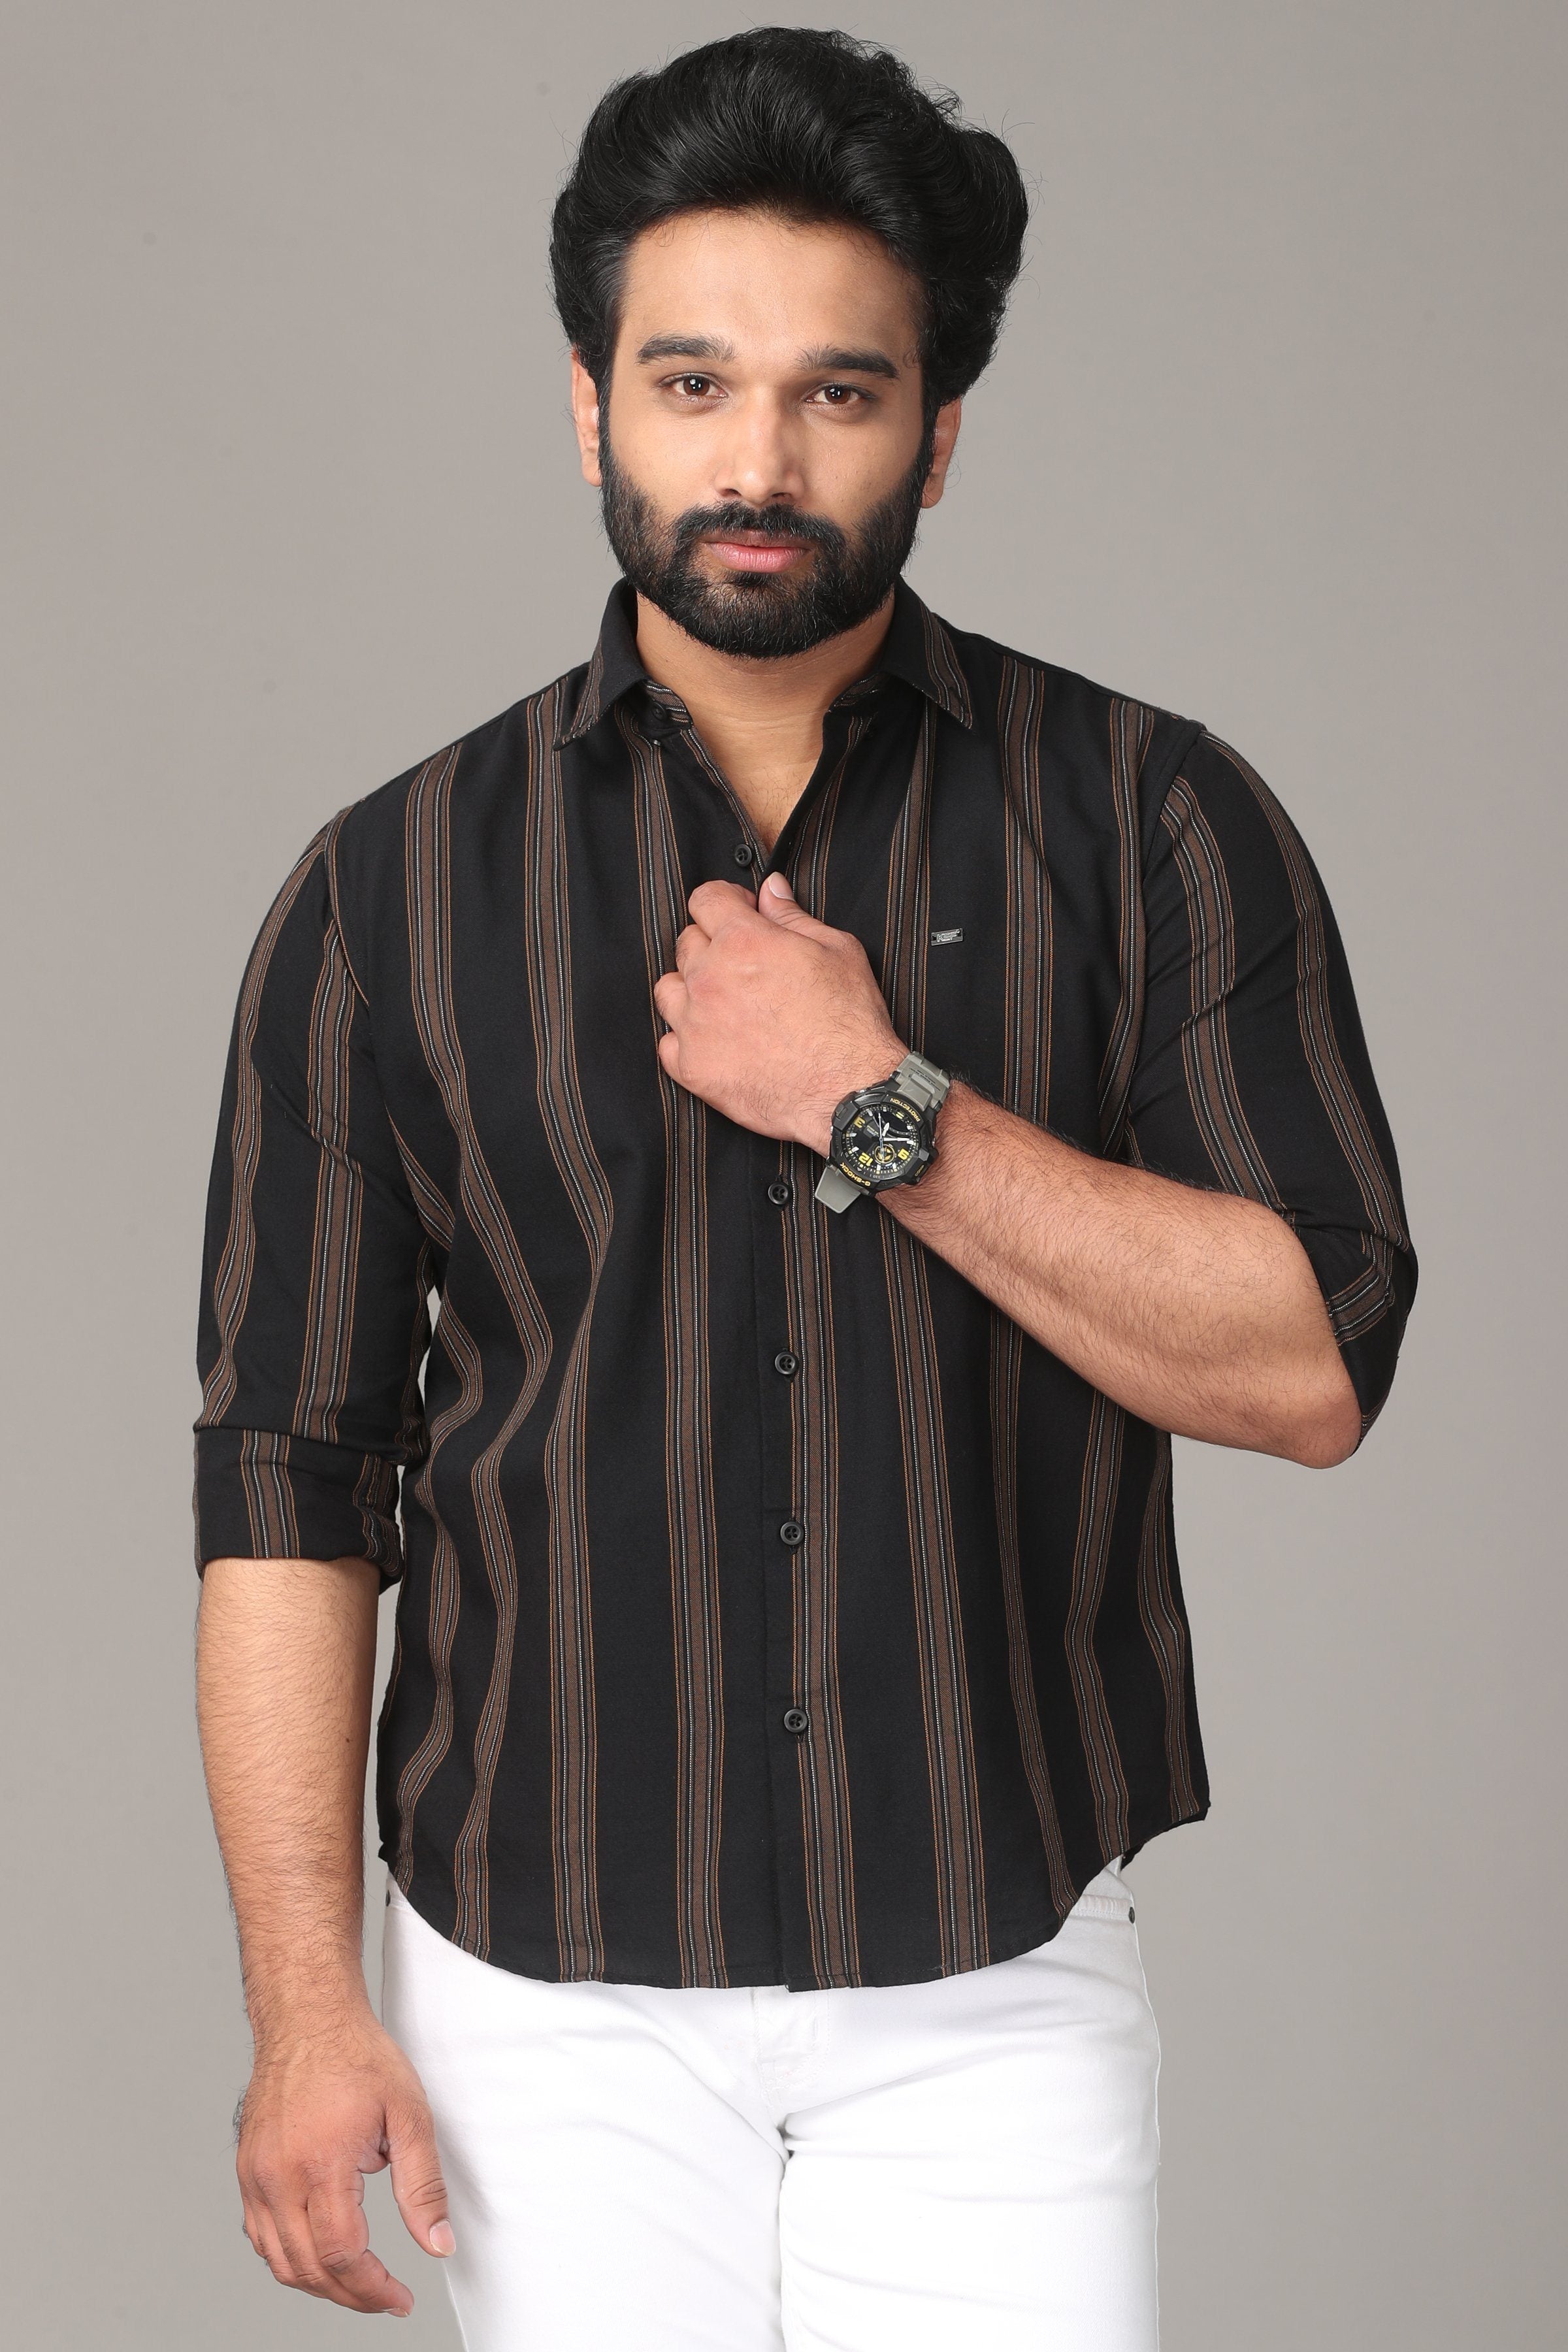 Black Full Sleeve Shirt with Brown Stripes Shirts KEF S 